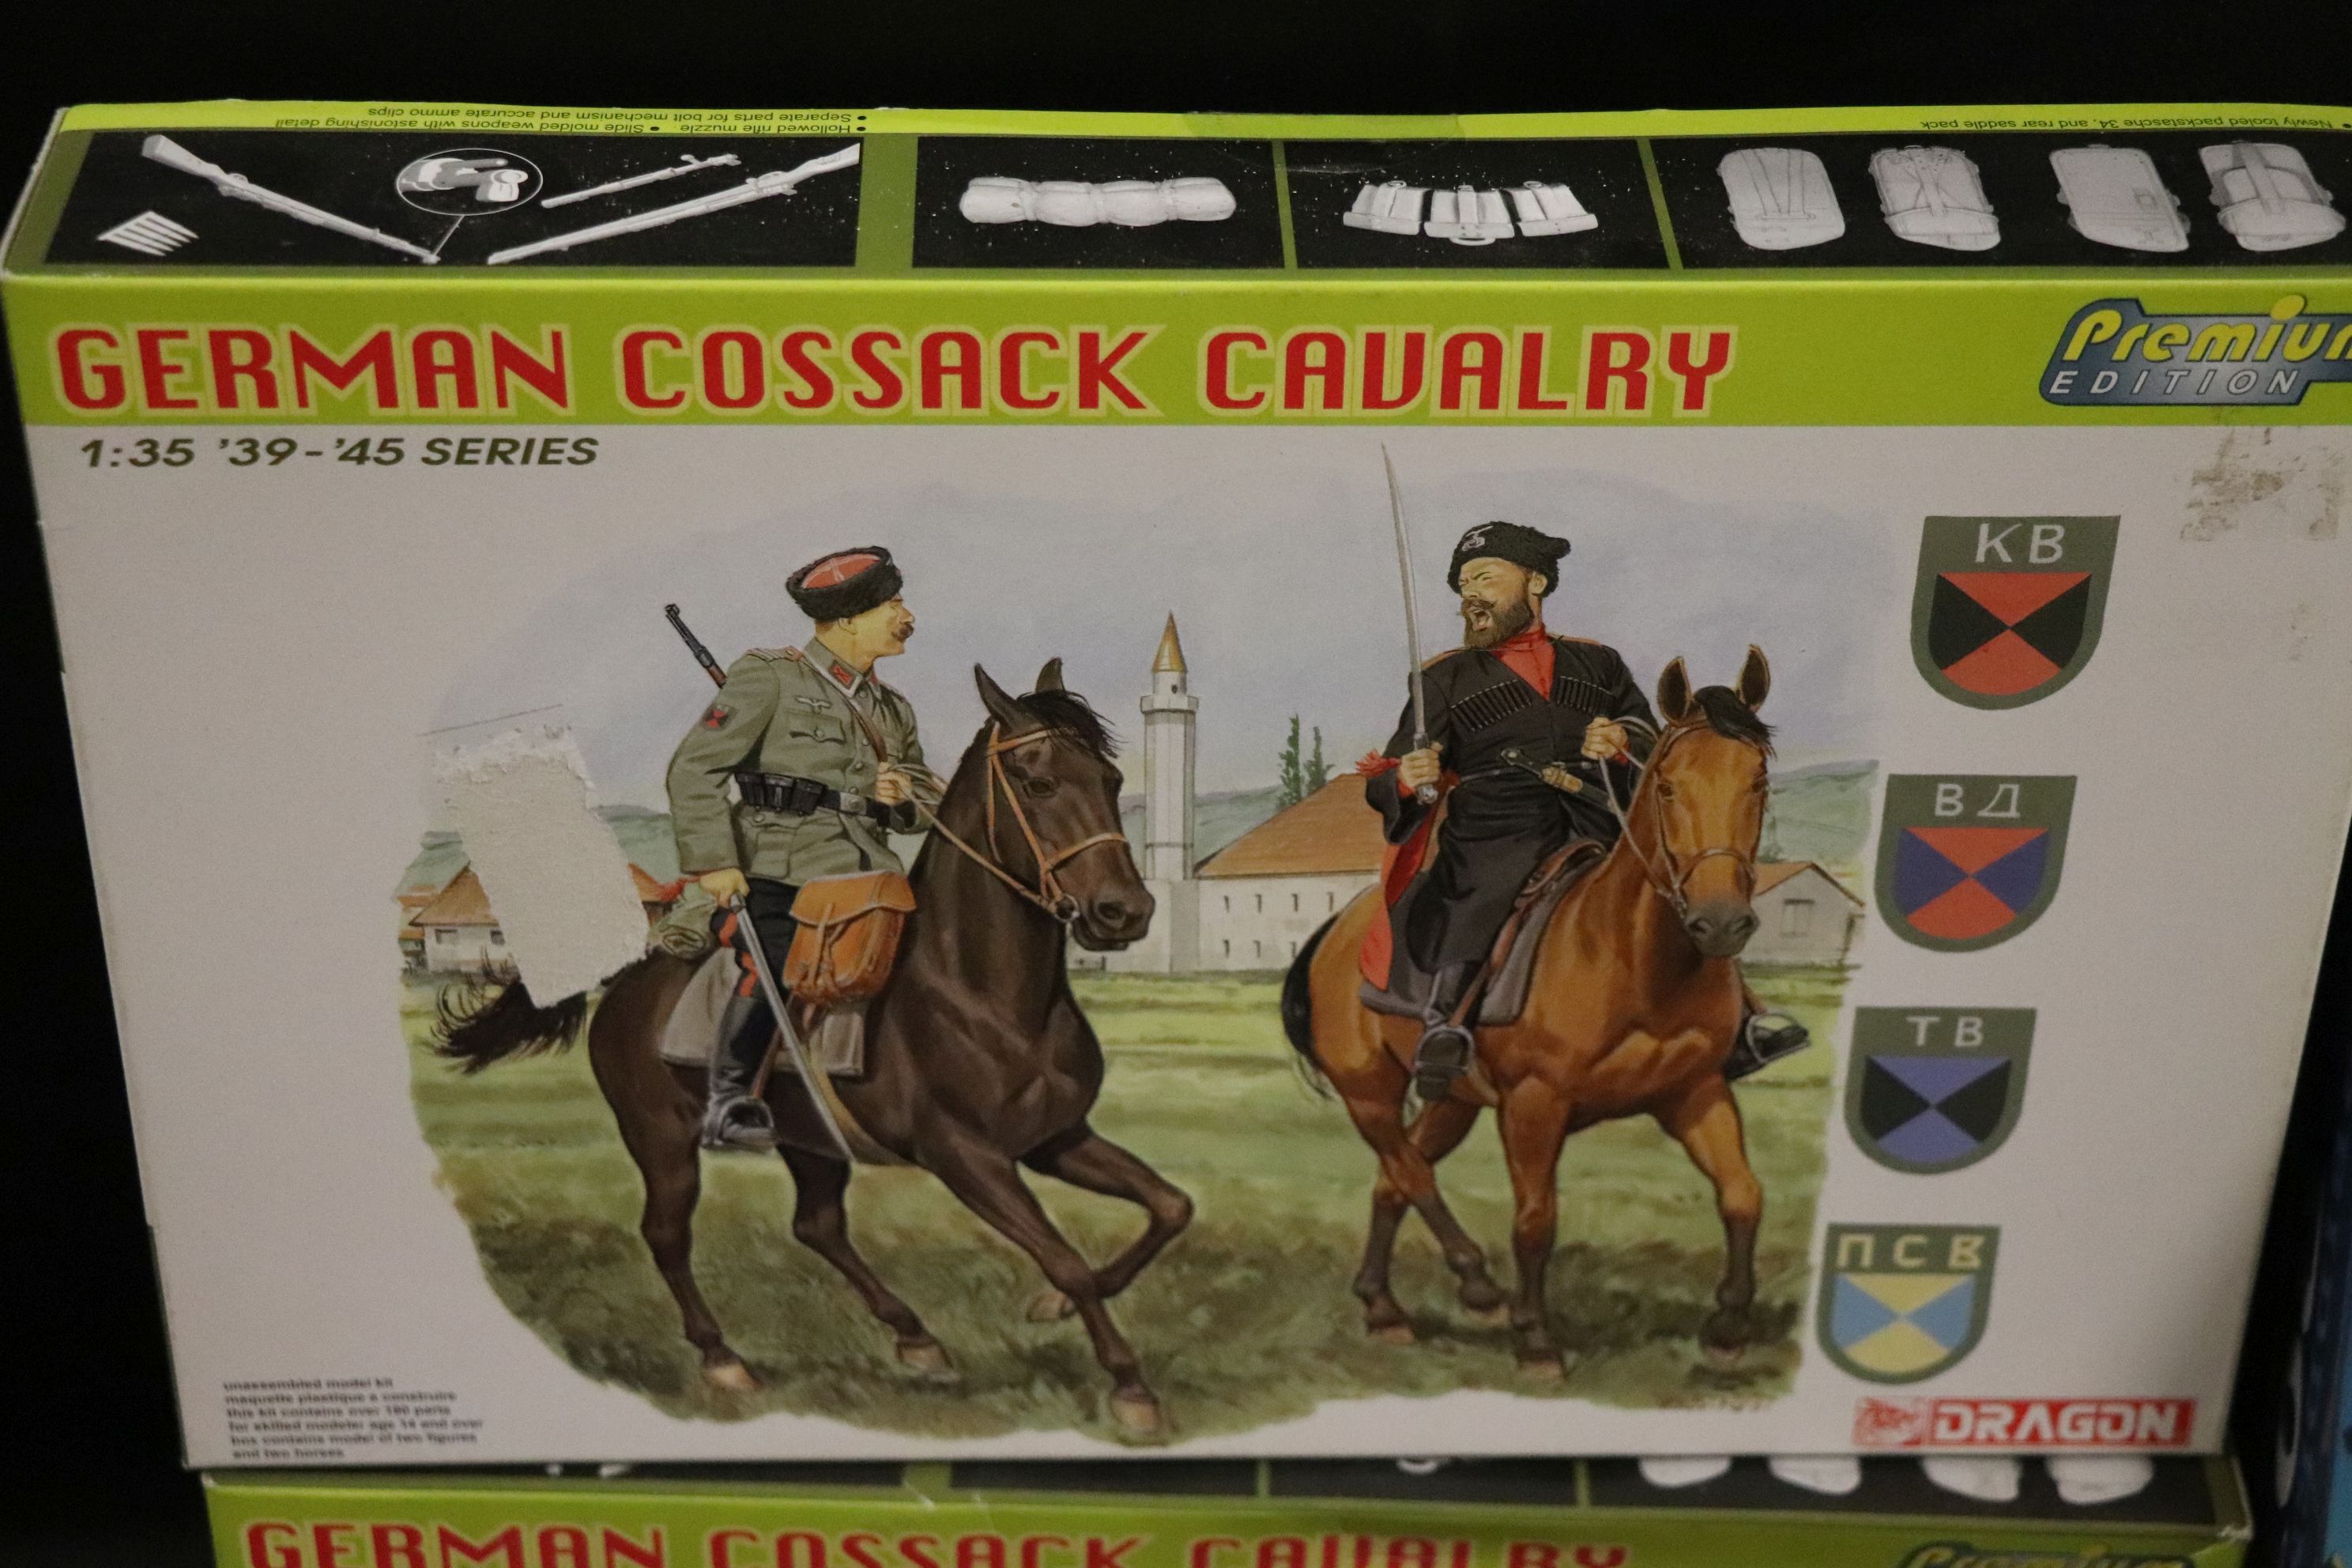 Two Boxed Dragon German Cossack Cavalry Model Kits, Polar Lights Boxed and Sealed Forbidden Planet - Image 2 of 5